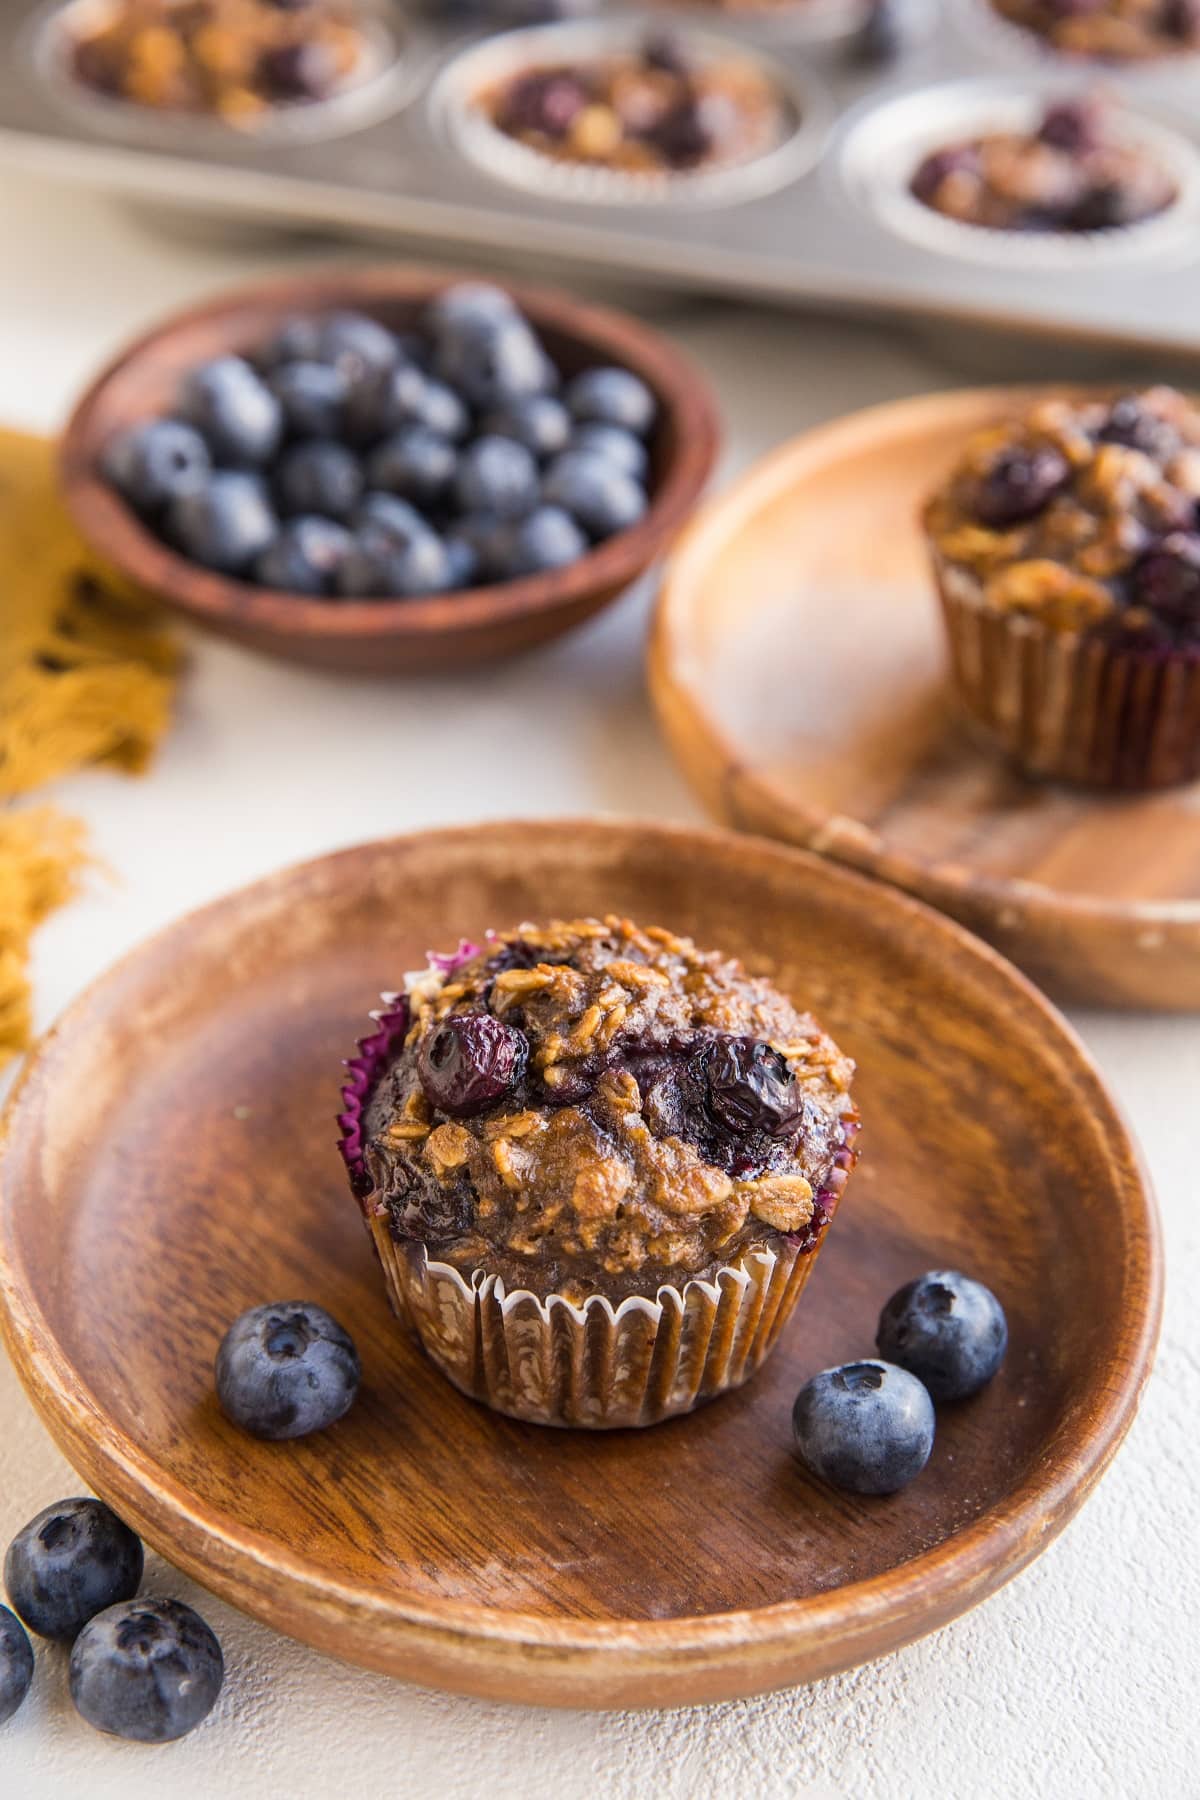 two oatmeal cups on wooden plates with blueberries to the side